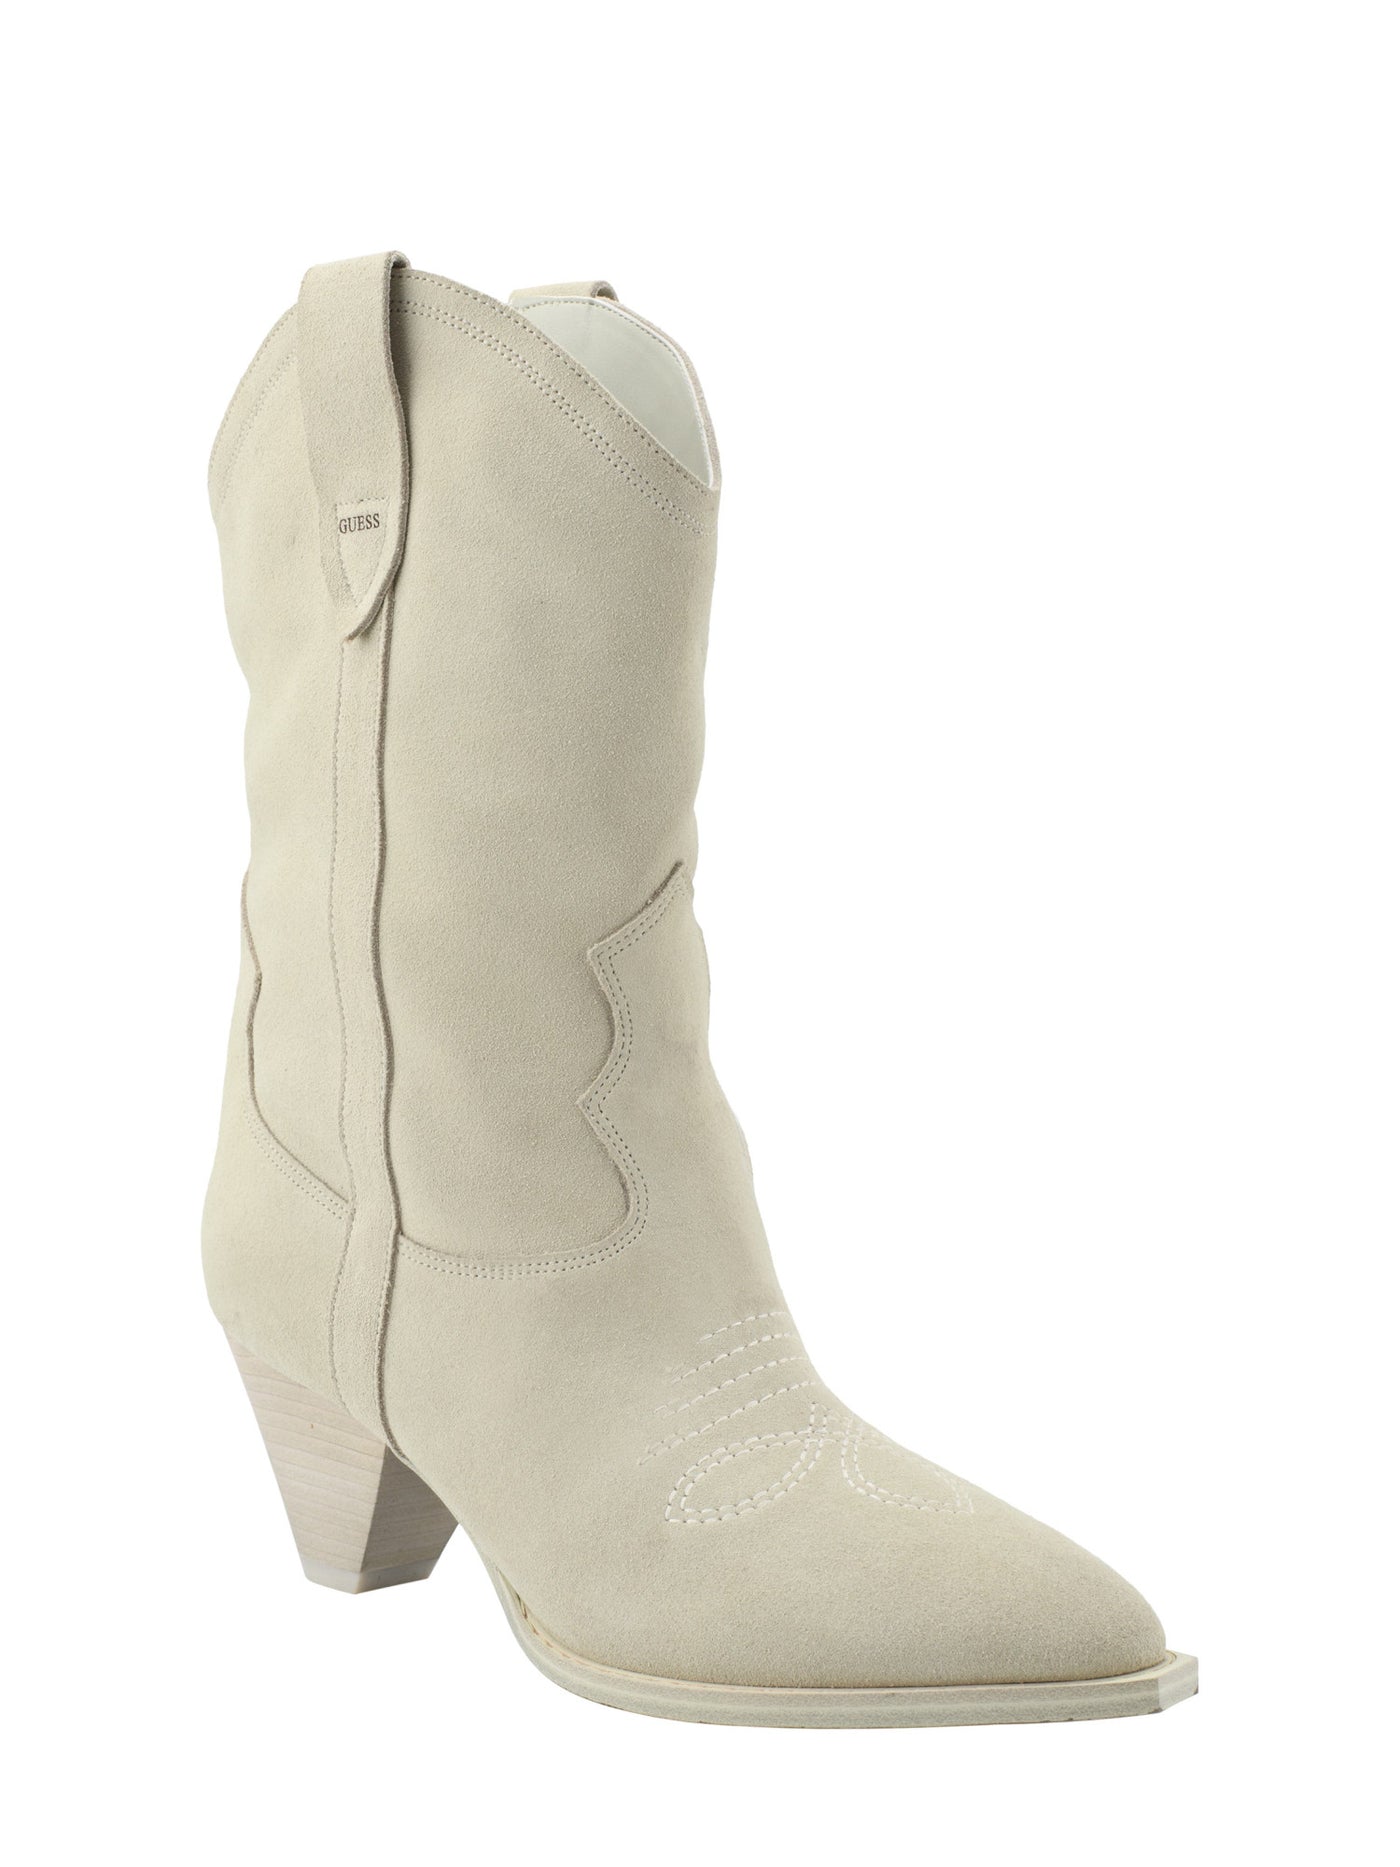 GUESS Womens Ivory Padded Odilia Round Toe Cone Heel Leather Western Boot 6.5 M